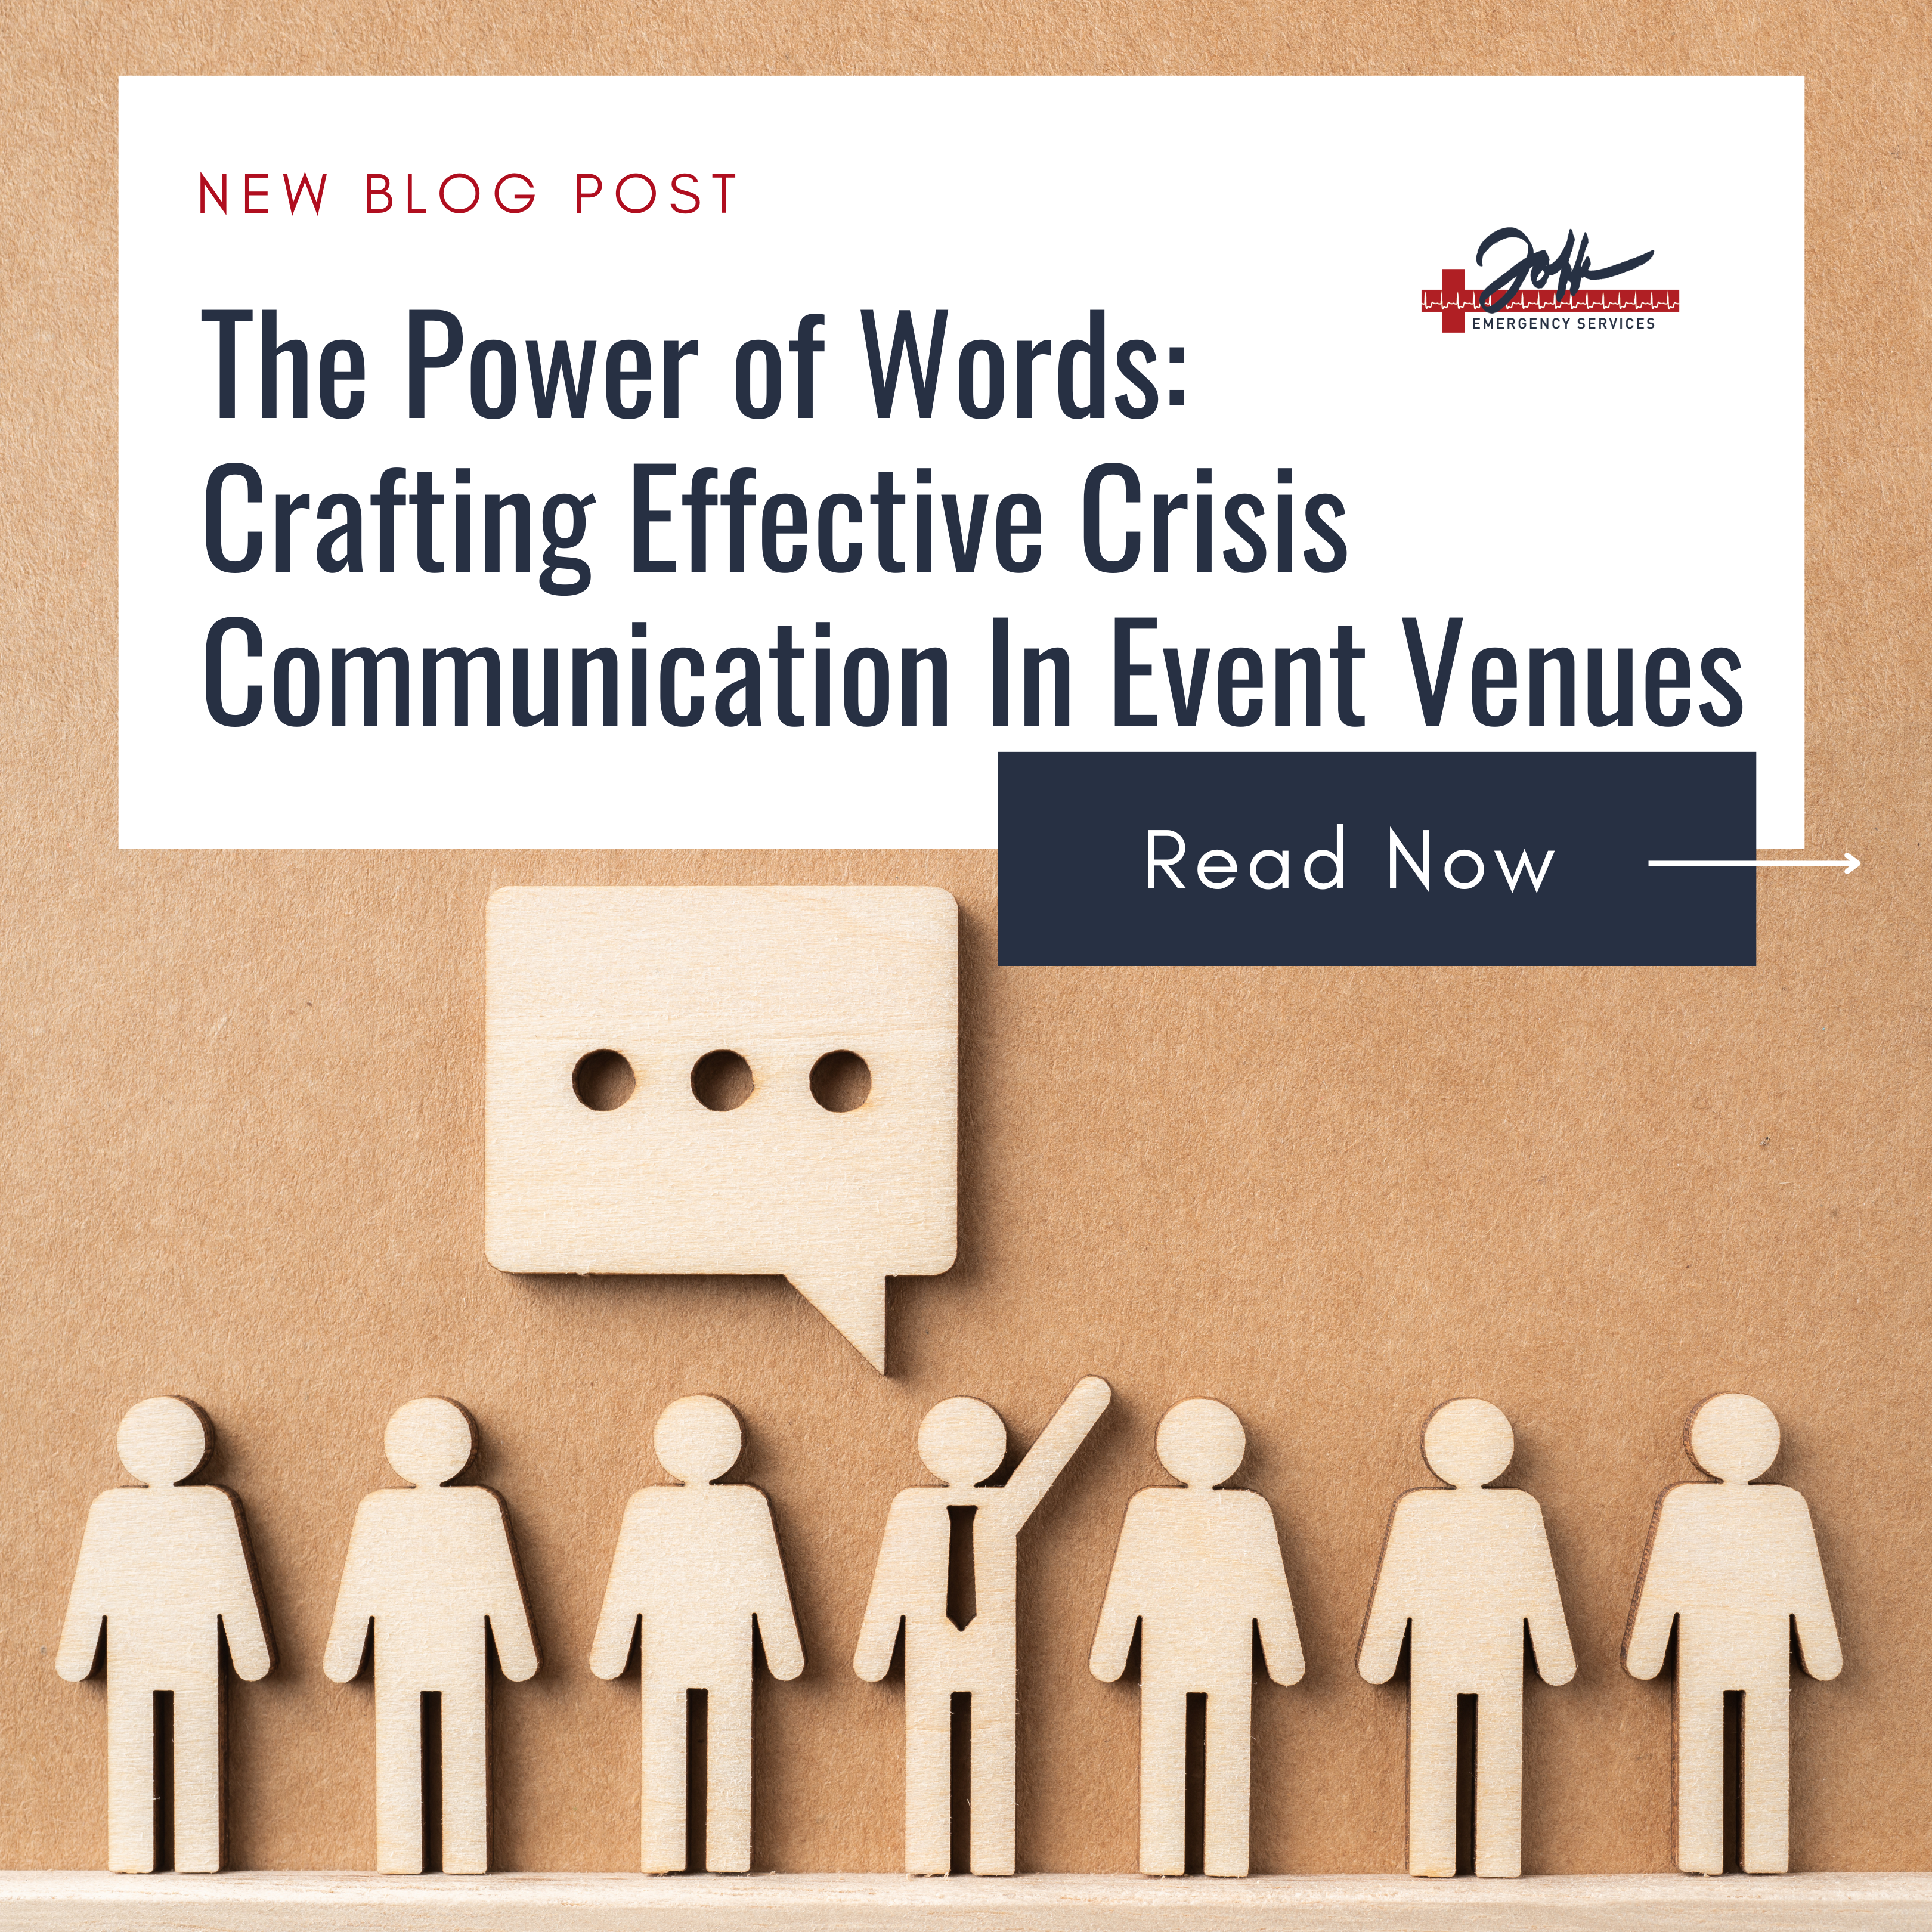 The Power of Words: Crafting Effective Crisis Communications in Event Venues